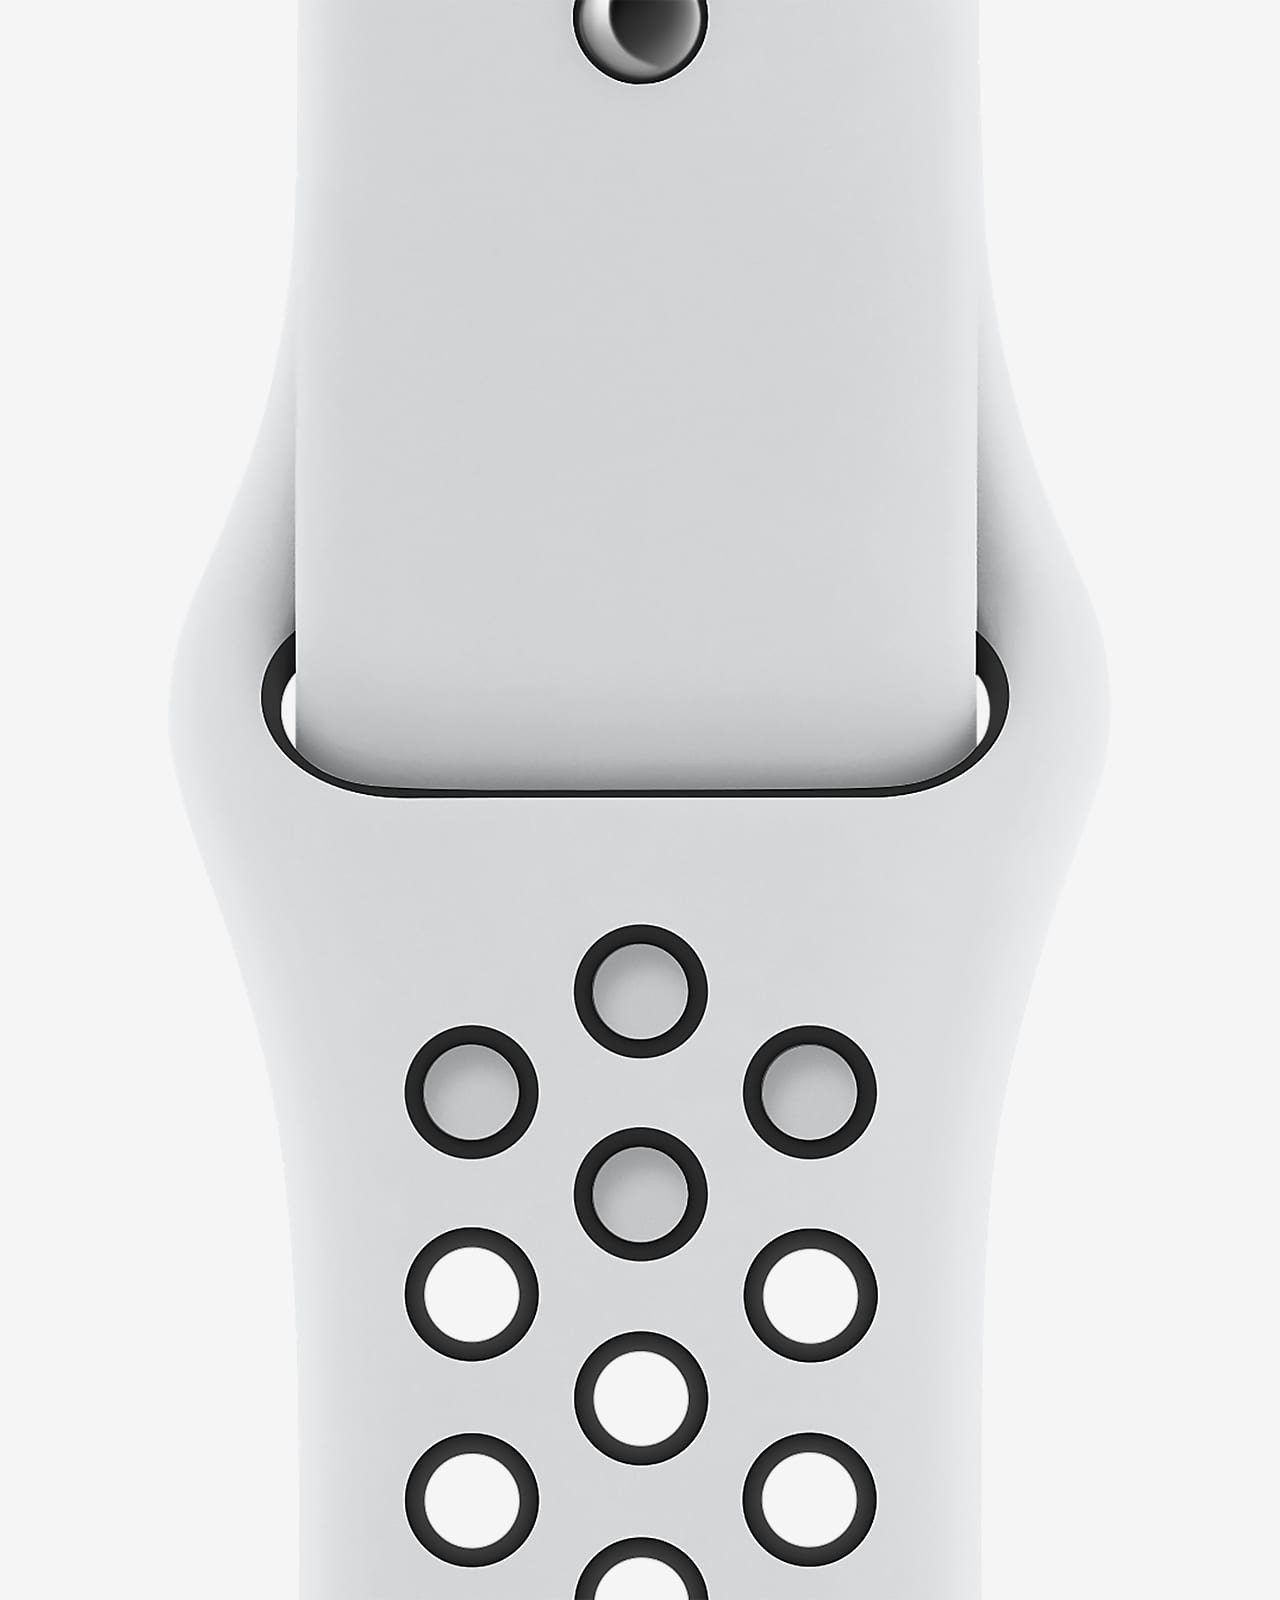 Apple Watch Nike Series 6 (GPS + Cellular) with Nike Sport Band 40mm Silver  Aluminum Case